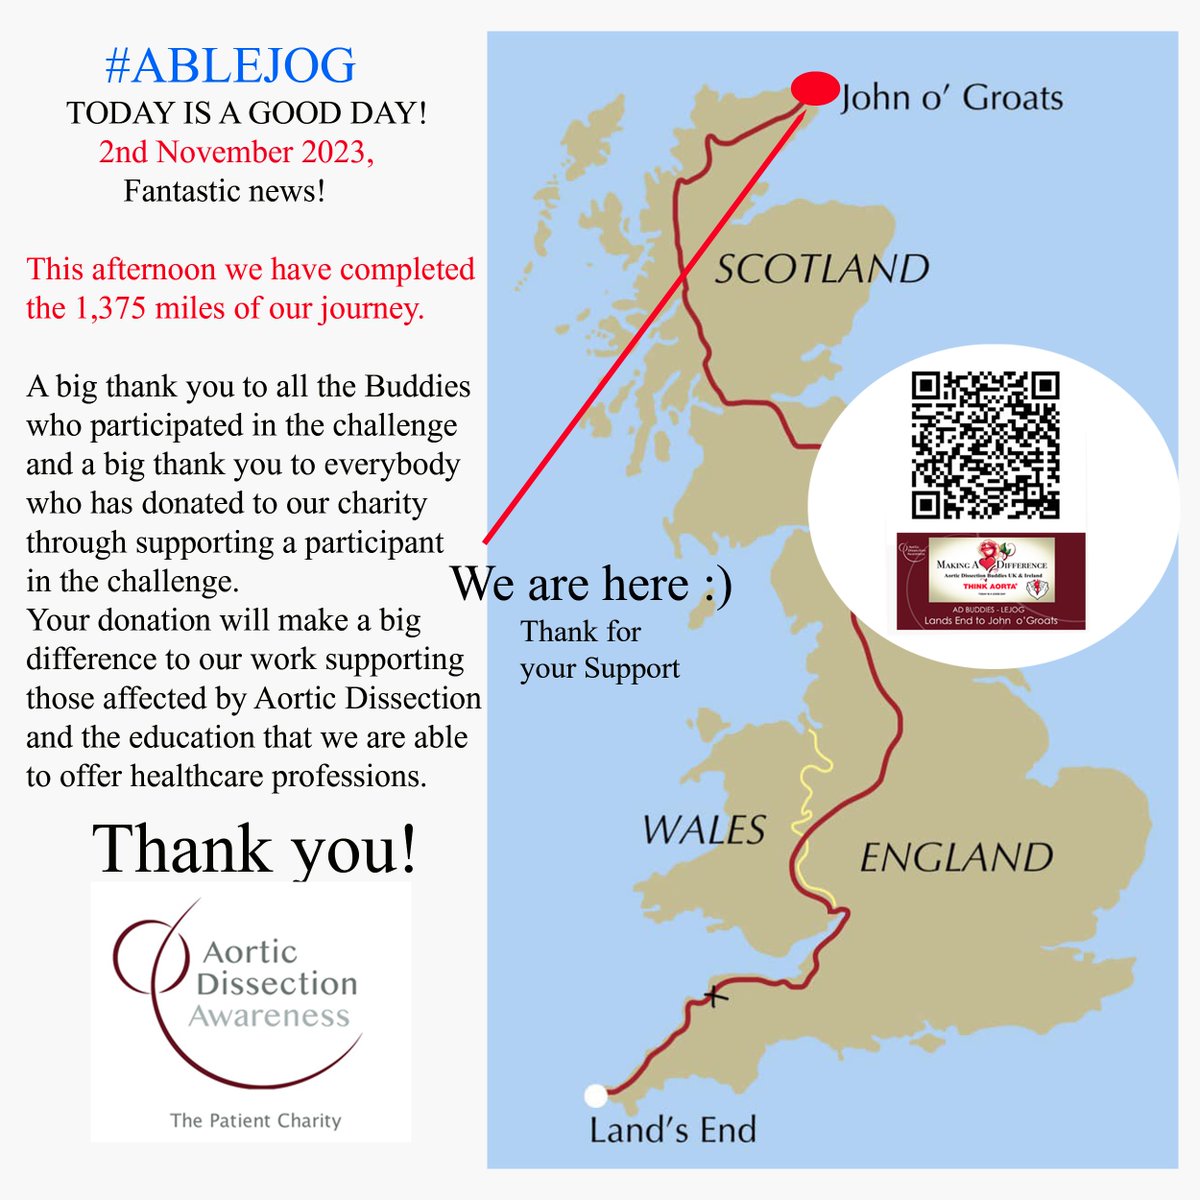 Amazing effort and much kudos go to our @aortabuddiesuki #ablejog team in completing their 1,375 mile Lands End to John o'Groats Challenge in support of @AorticDissectUK & thinkaorta.net #aortaed #lejog THANK YOU EVERYONE, for your support @Appledorianiexp AD Survivors.